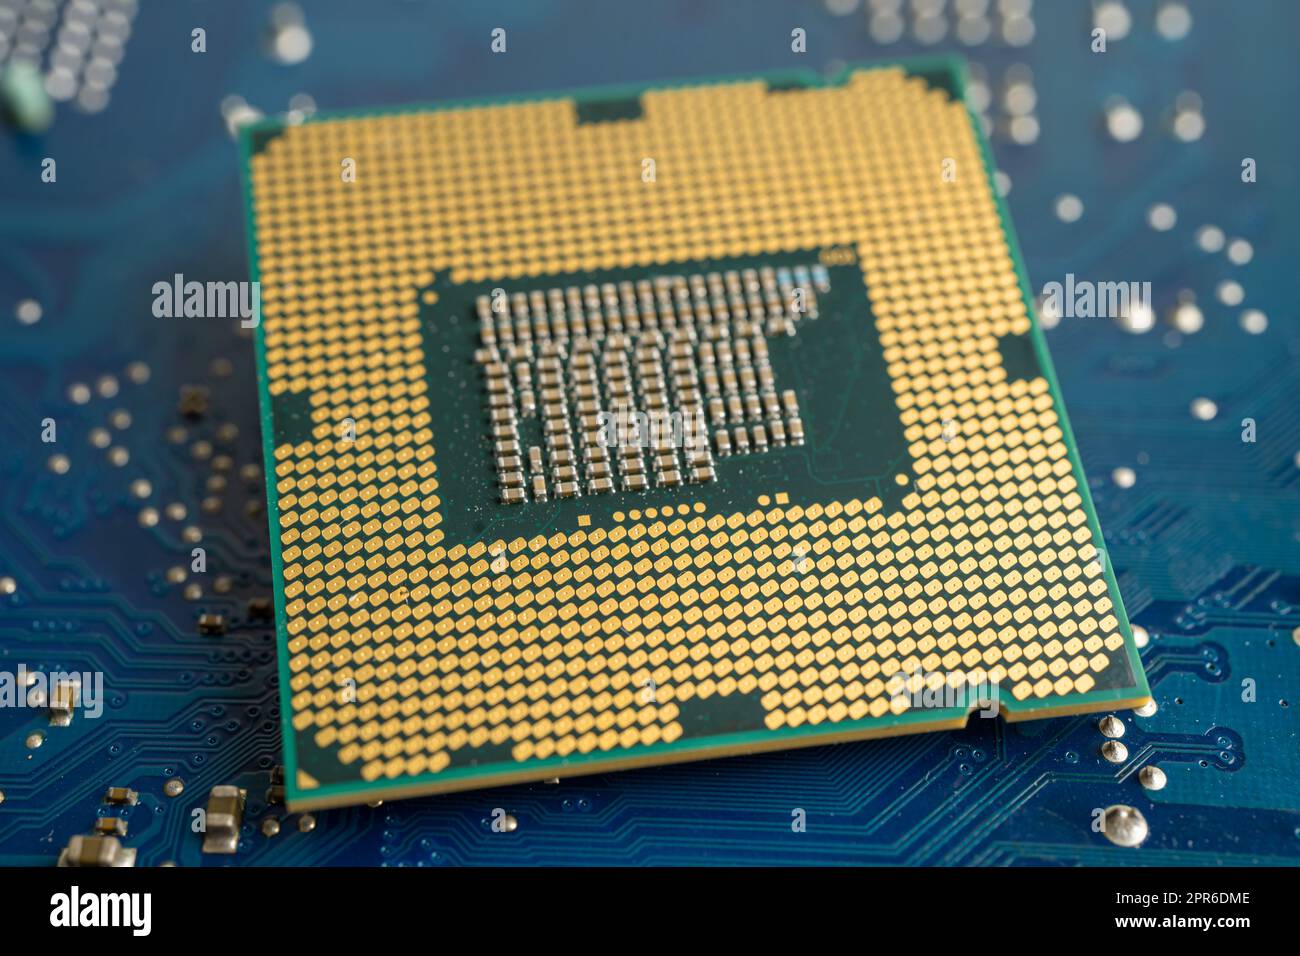 CPU, central processor unit chip Chip on circuit board in PC and laptop computer technology. Stock Photo